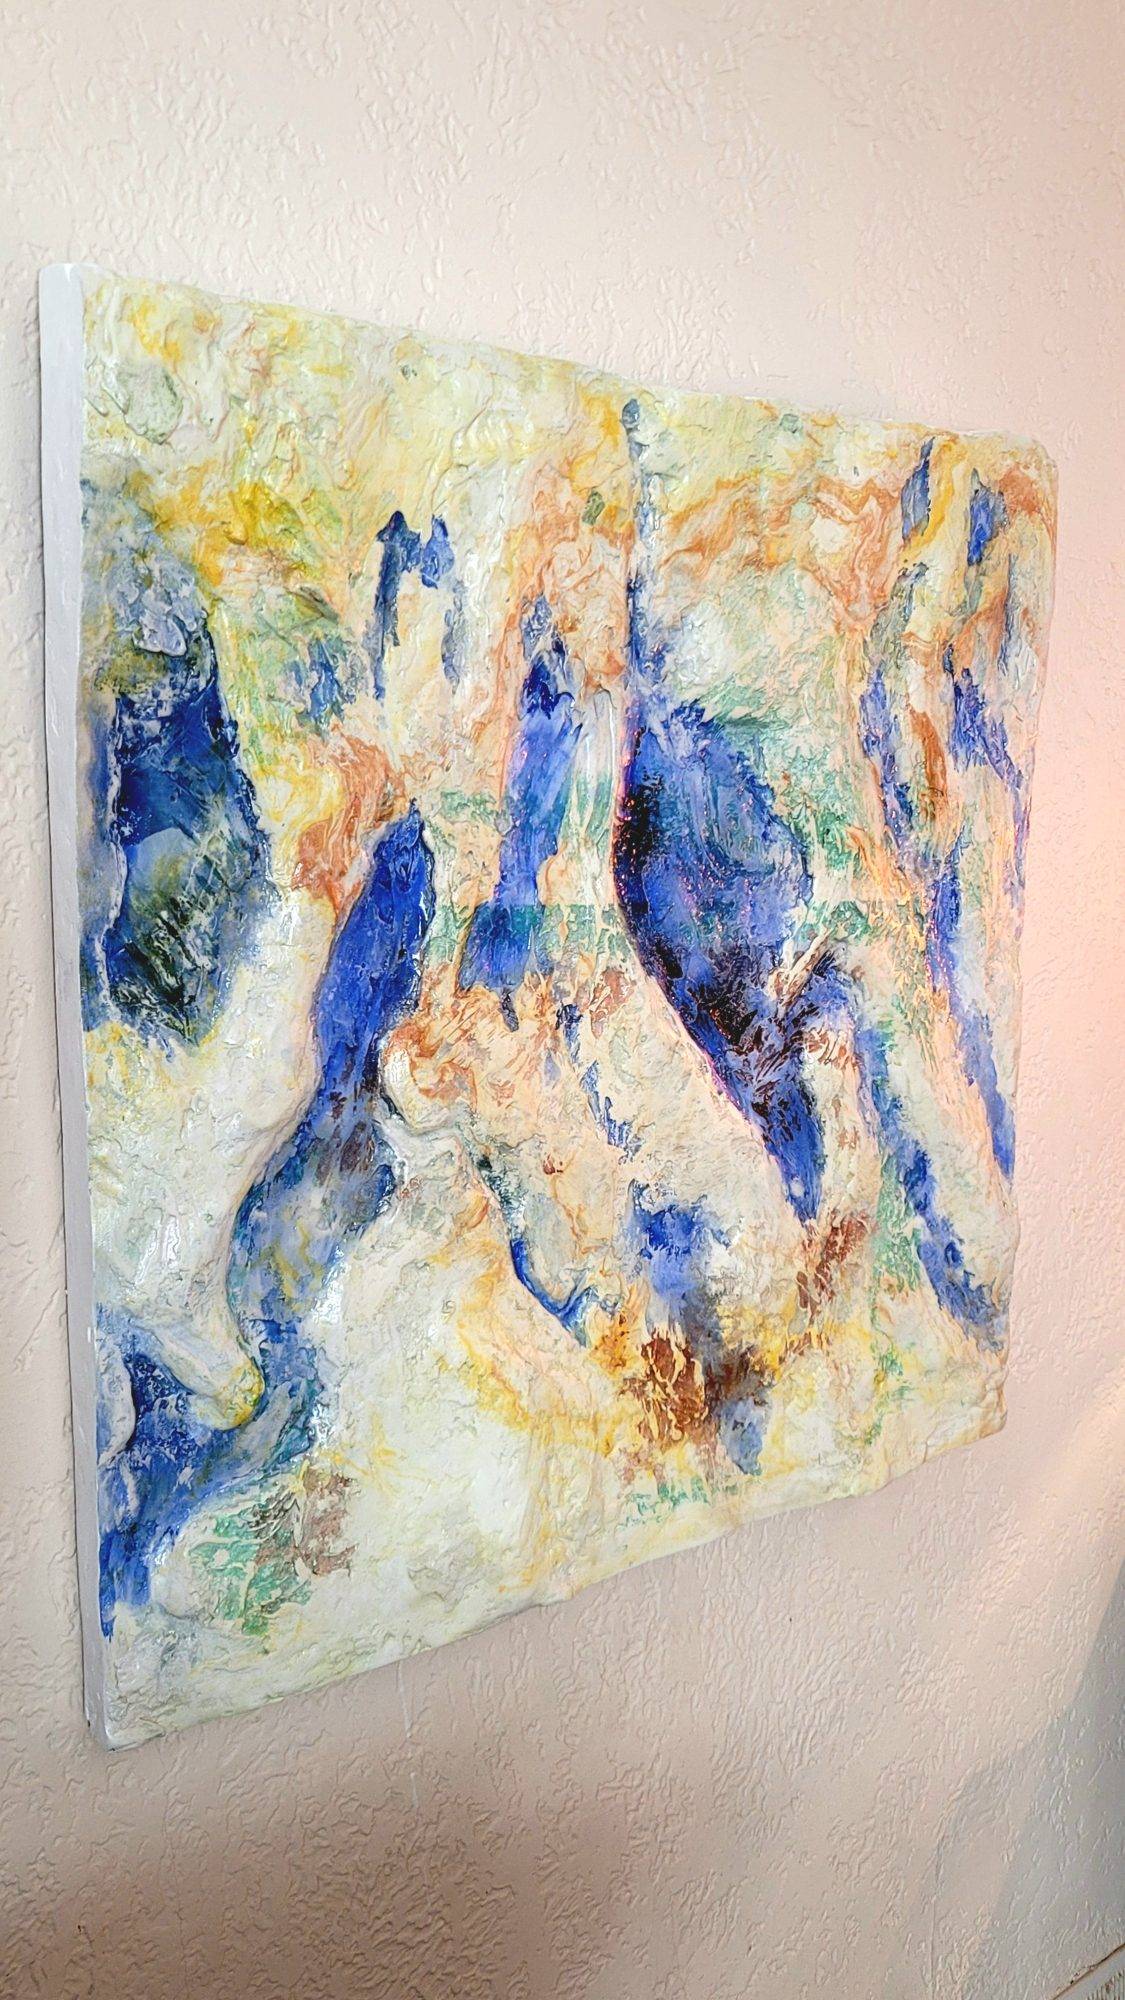 three dimensional watercolor painting of tide pools using yellow, white, sienna, viridian, and ultramarine blue